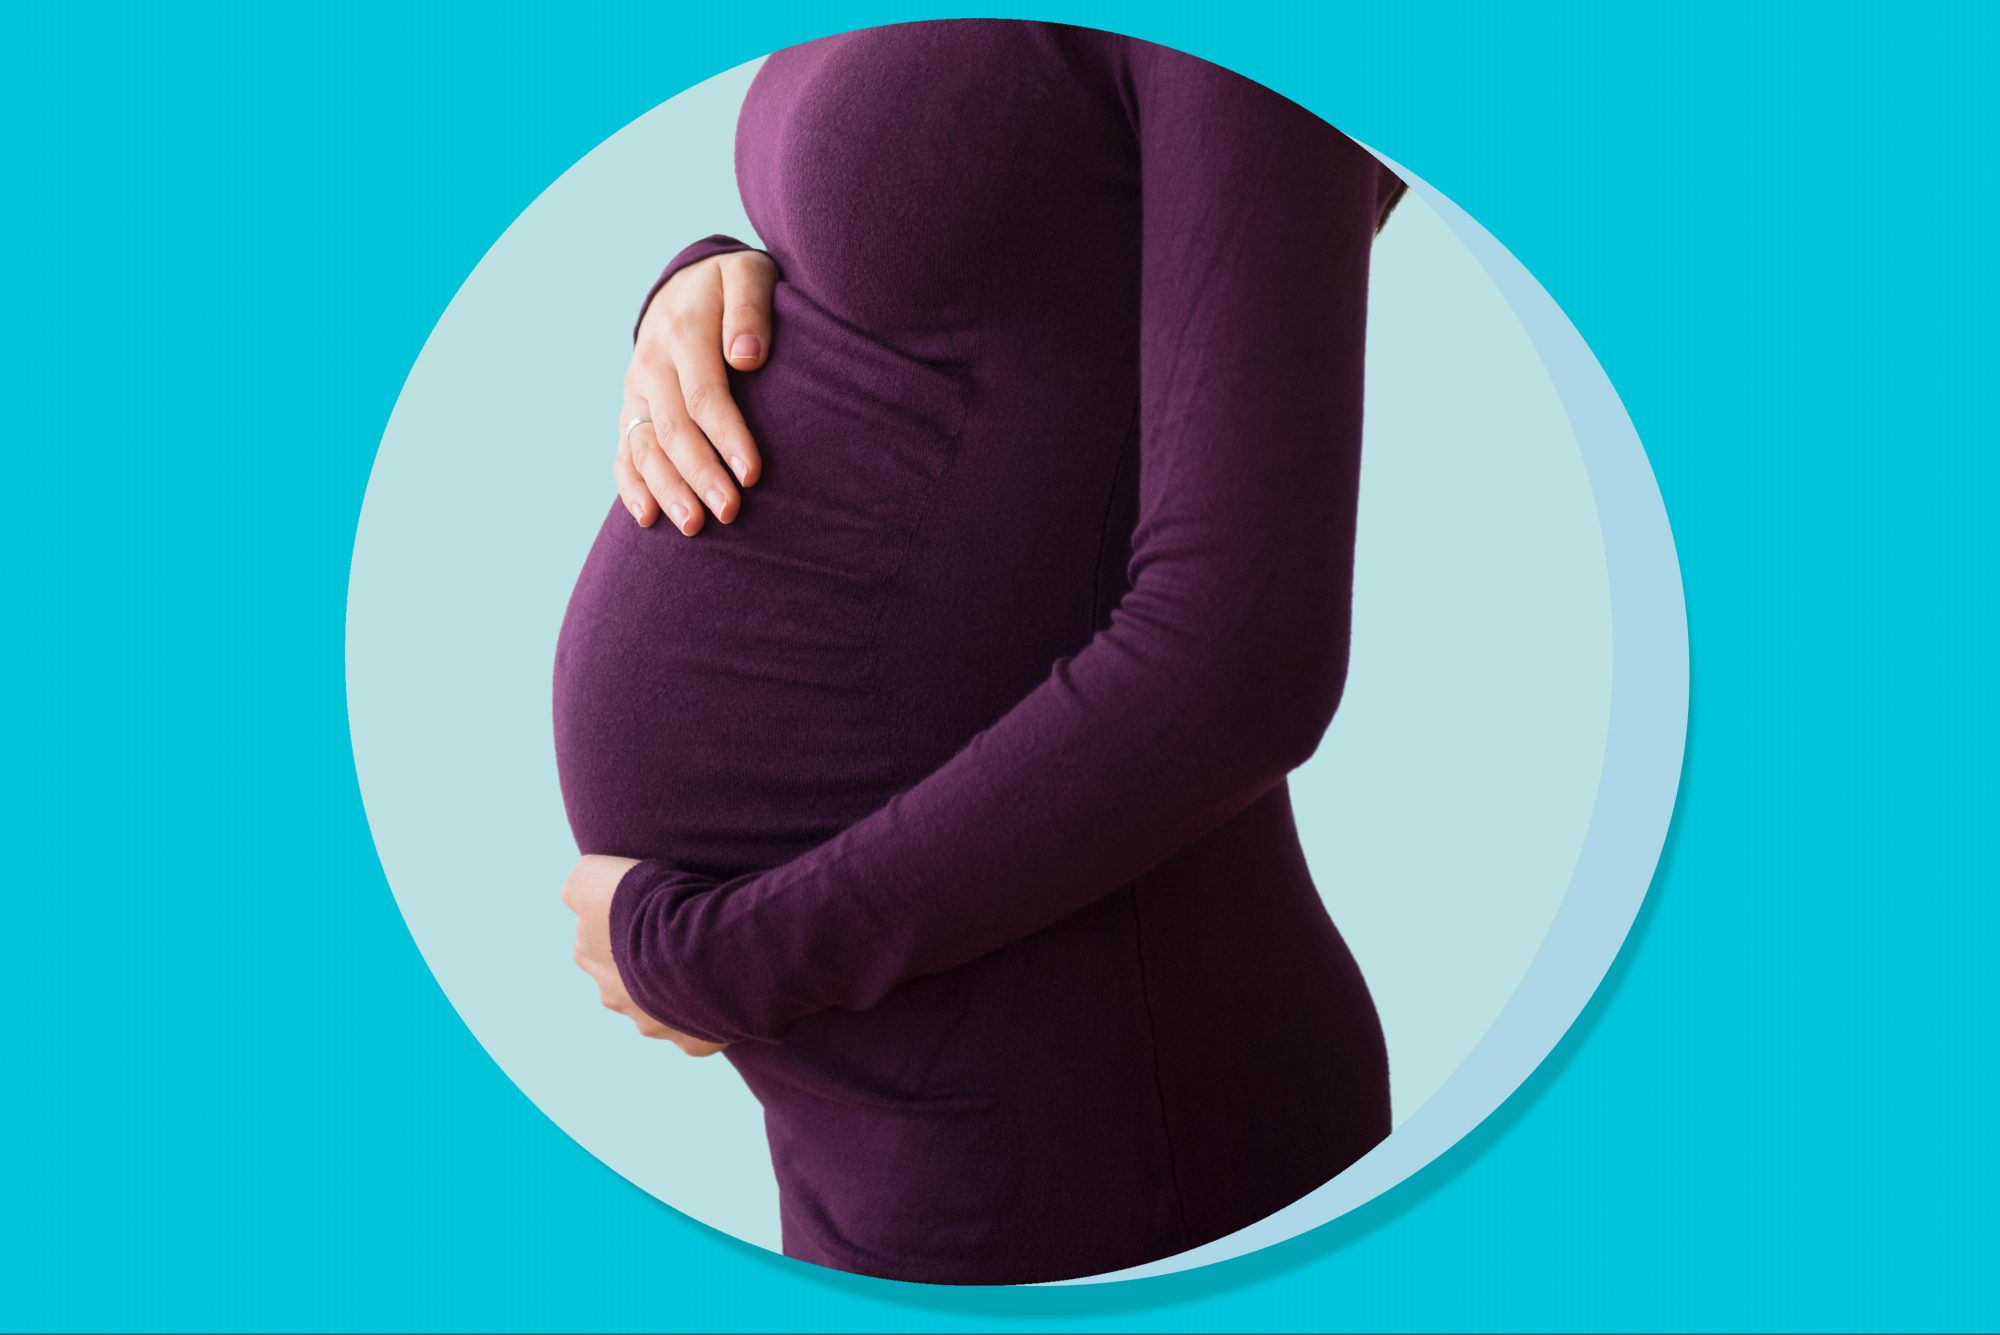 An image of a pregnant woman on a colorful background.